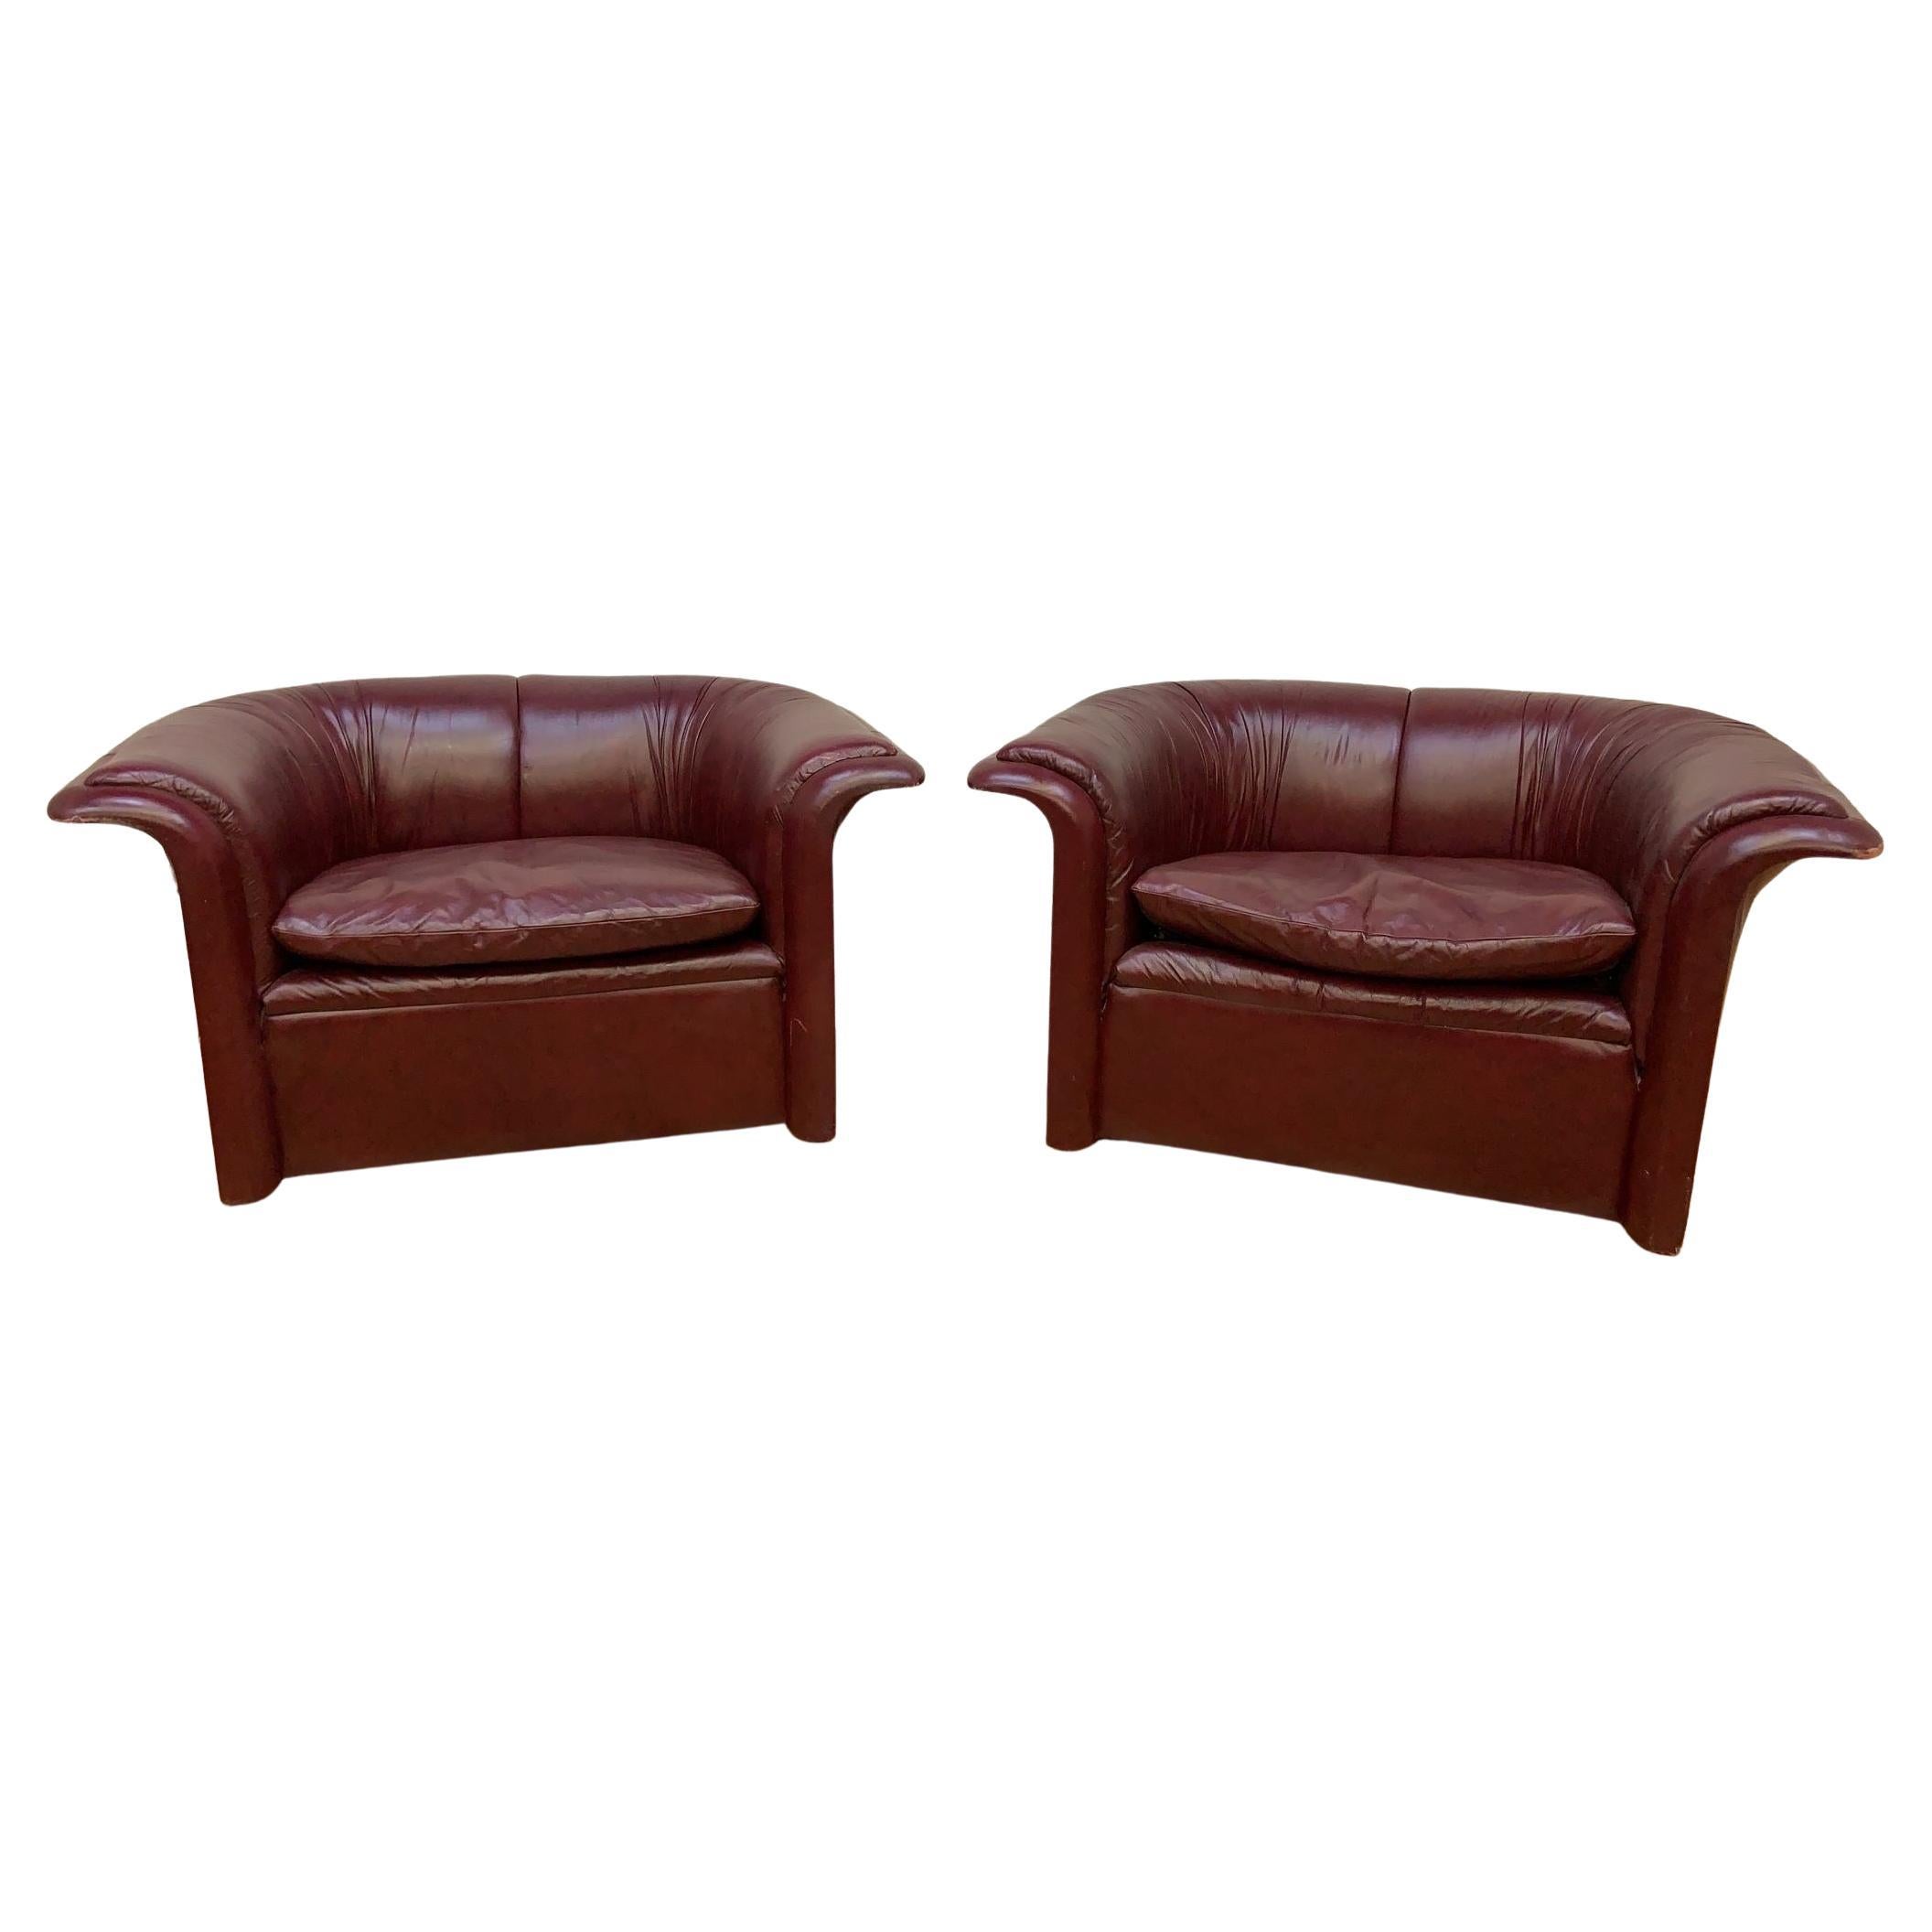 MCM Oversized Flare-Arm Leather Lounges by Dennis Christianson for Dunbar